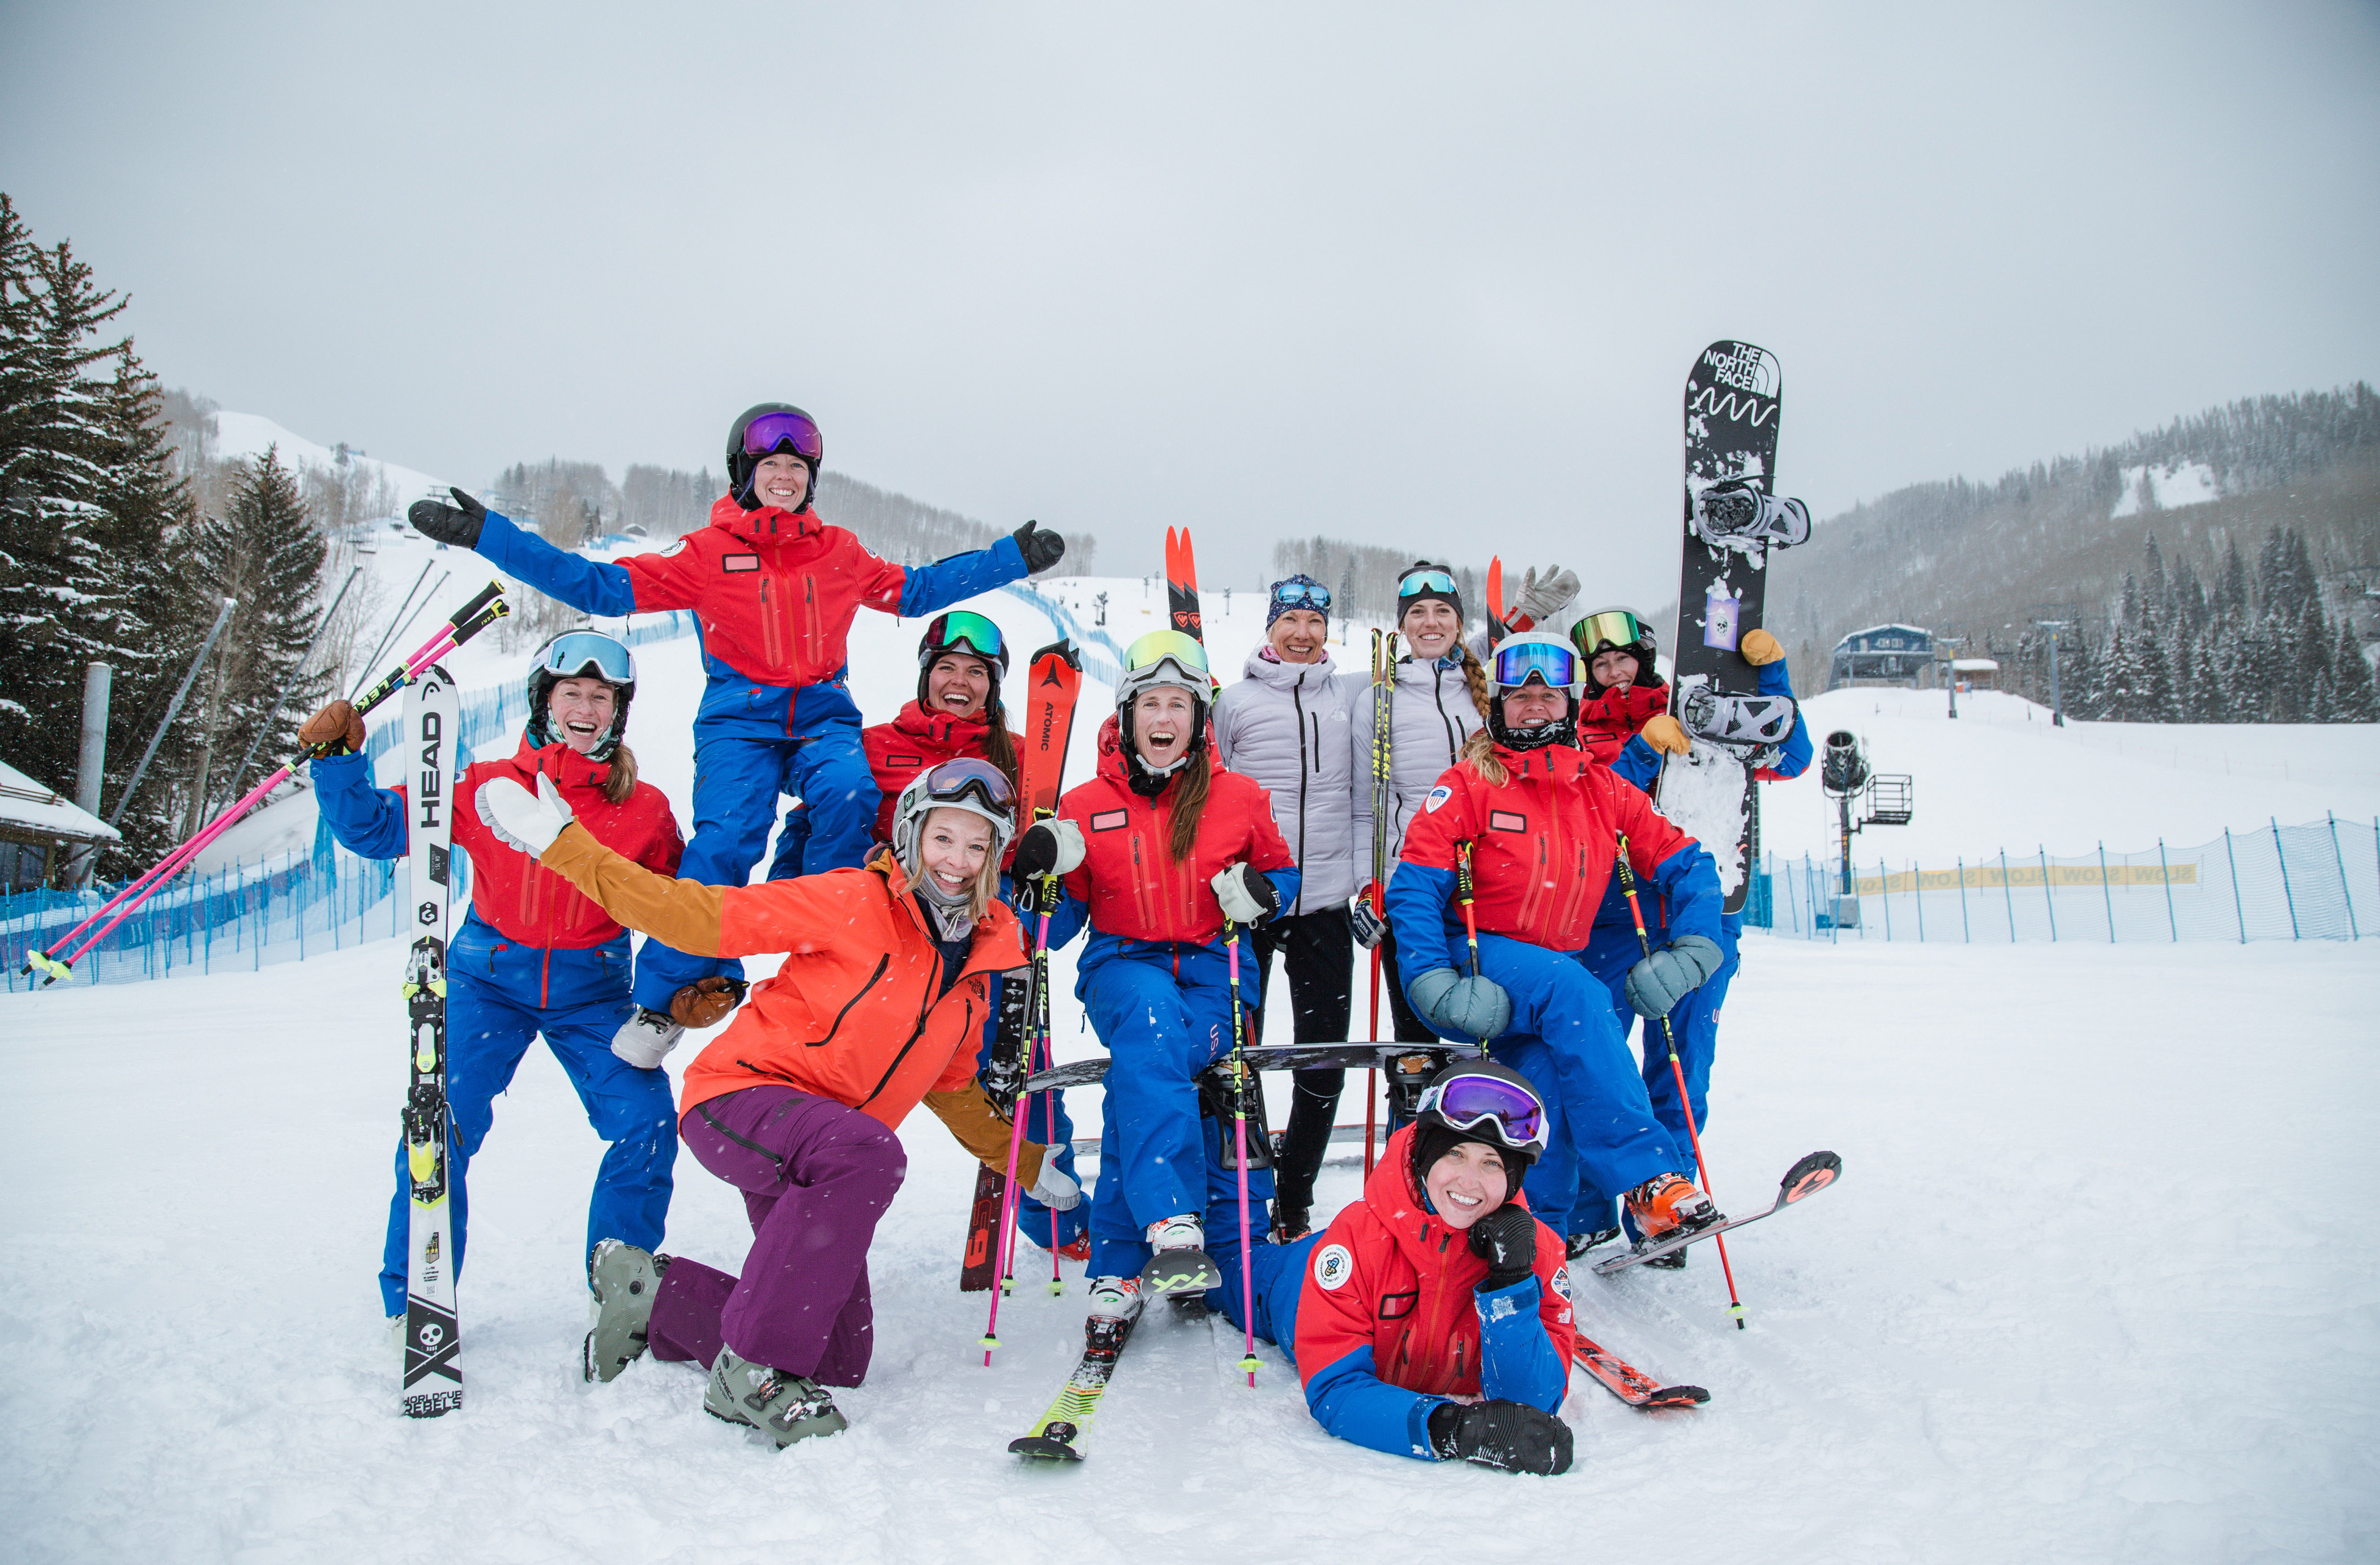 A smiling group of skiers and snowboarders at the top of a mountain